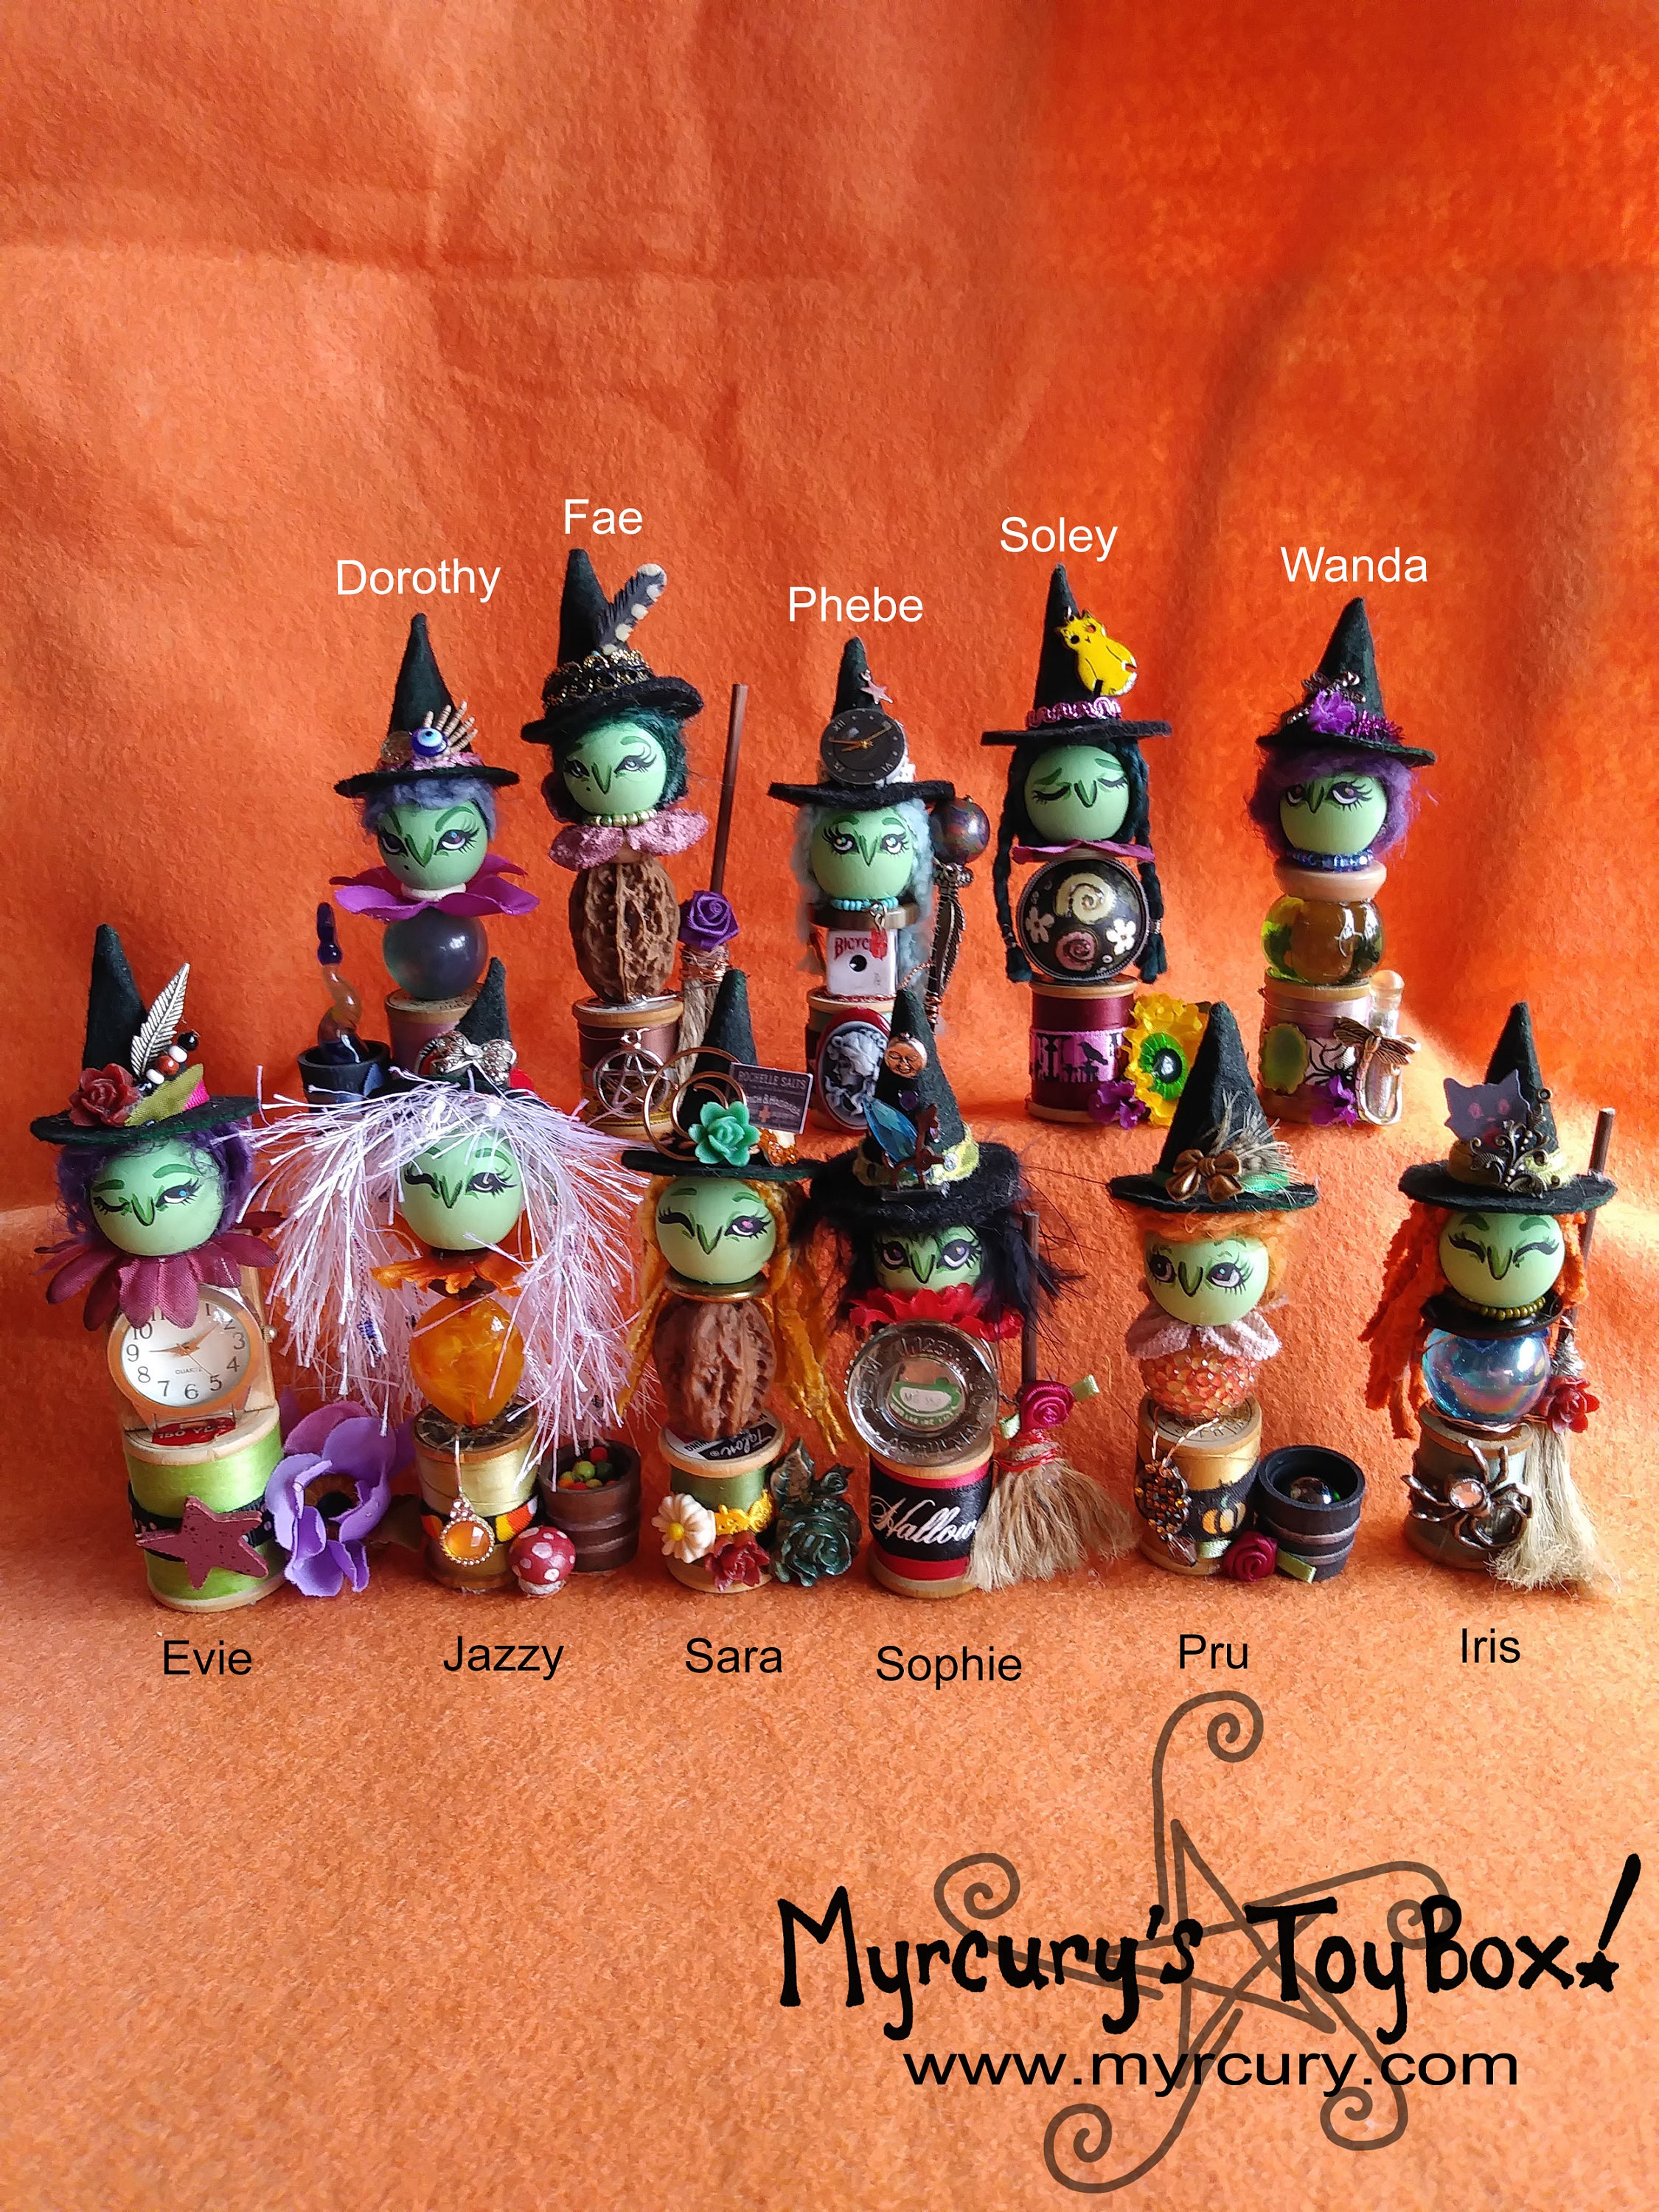 Cutely Spooky Hand Stitched Felt Voodoo Dolls with Pins Brooch Pin-On Voodoo Doll Excellent Costume Accessory for Halloween! Wearable